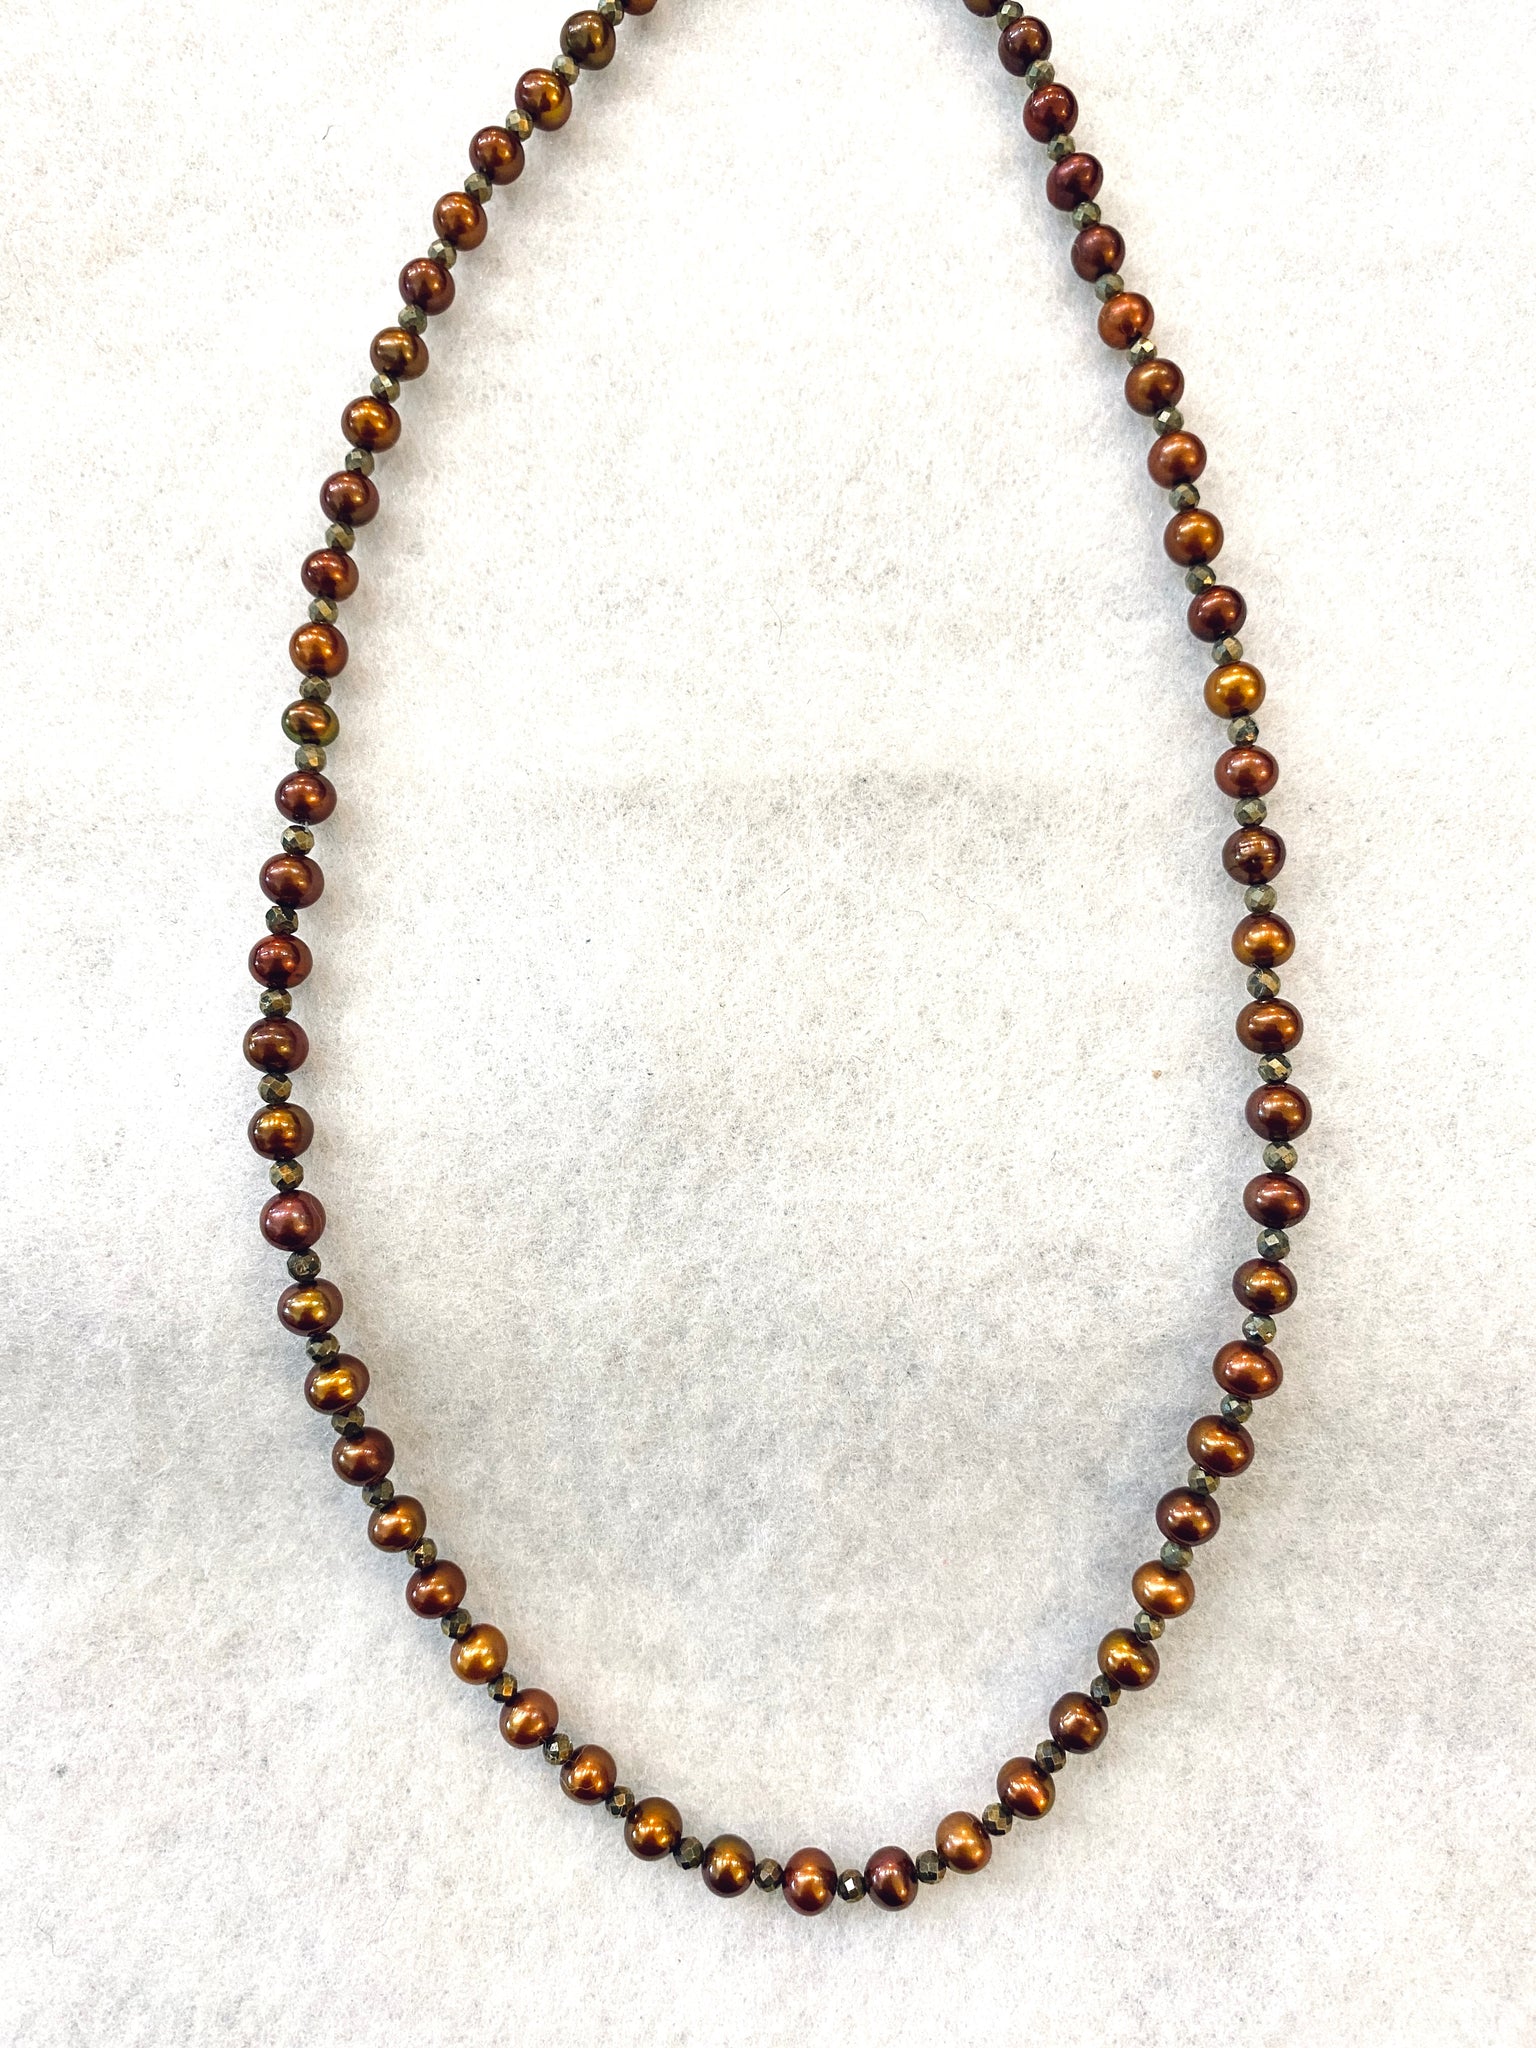 Pearl and Pyrite Beads Necklace Made In PDX